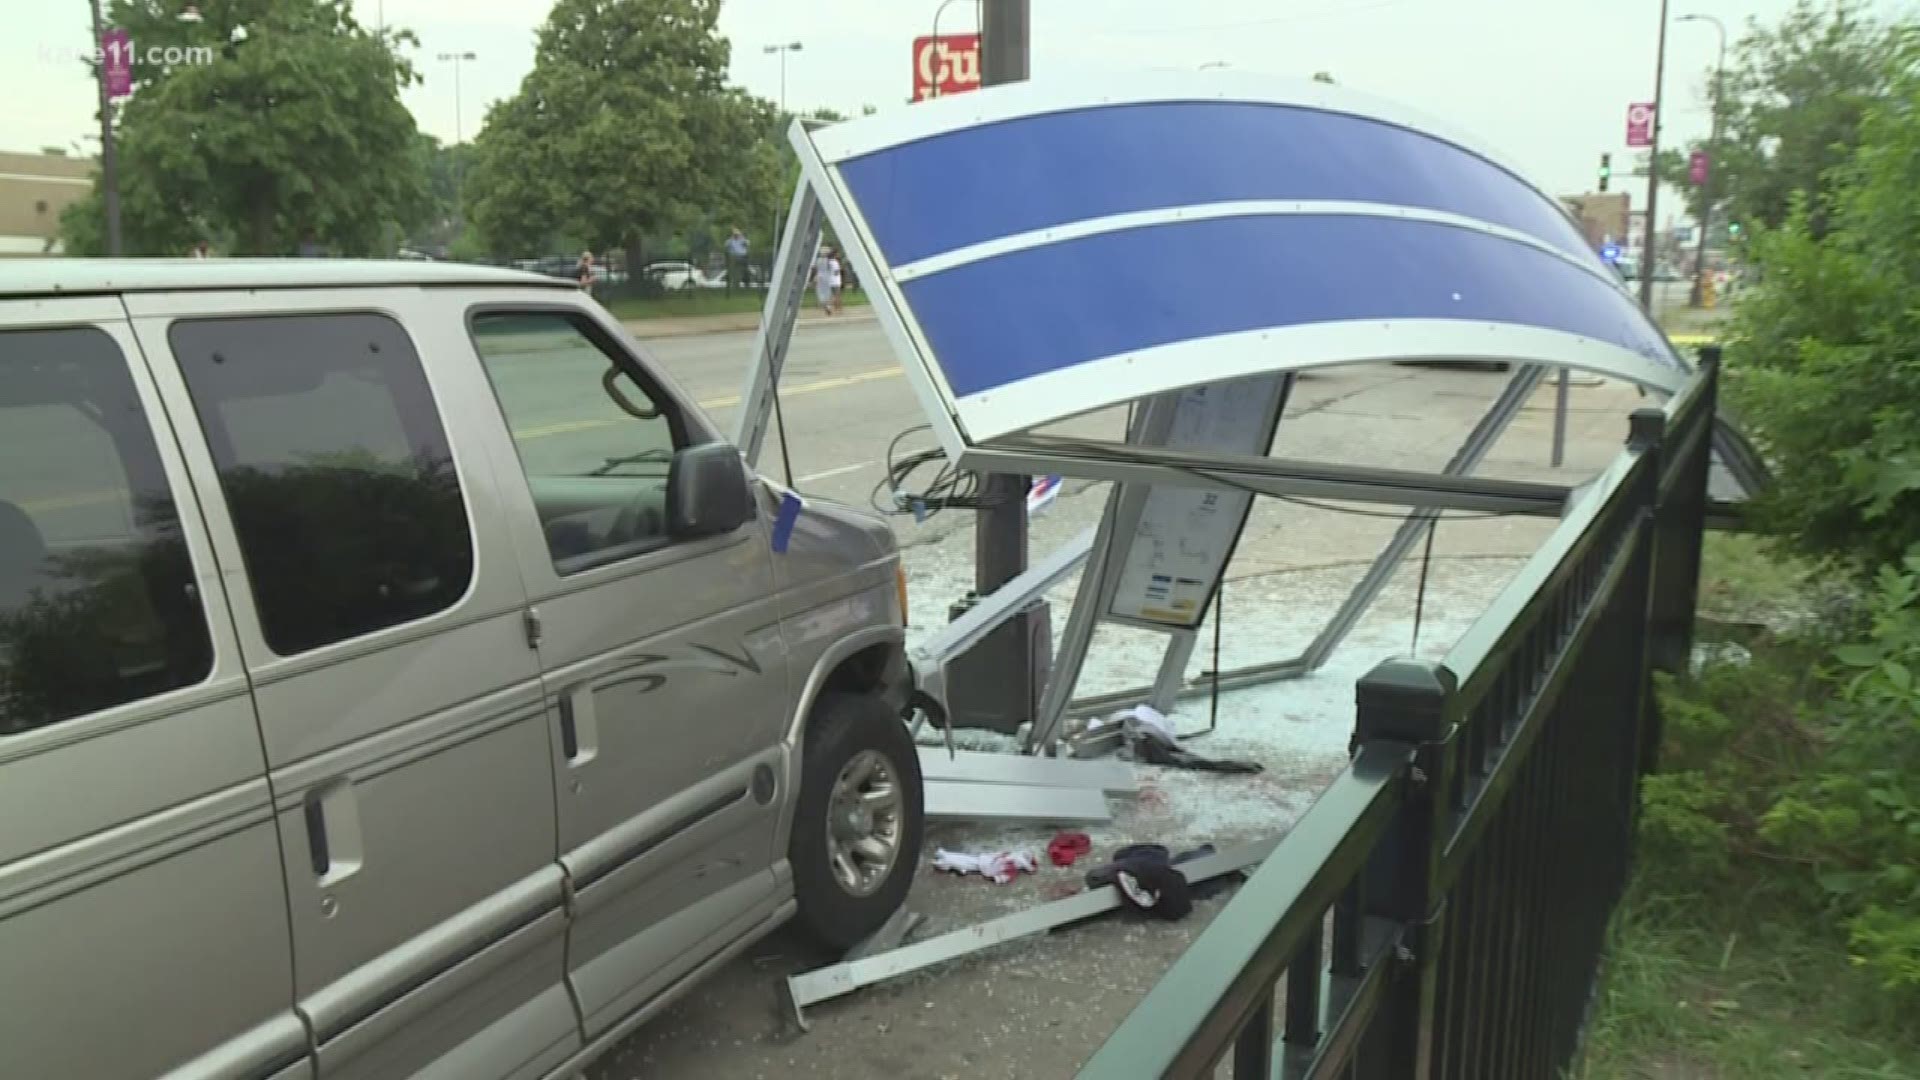 We're learning metro transit police have 'released' the driver of a van that slammed into a bus shelter earlier today.